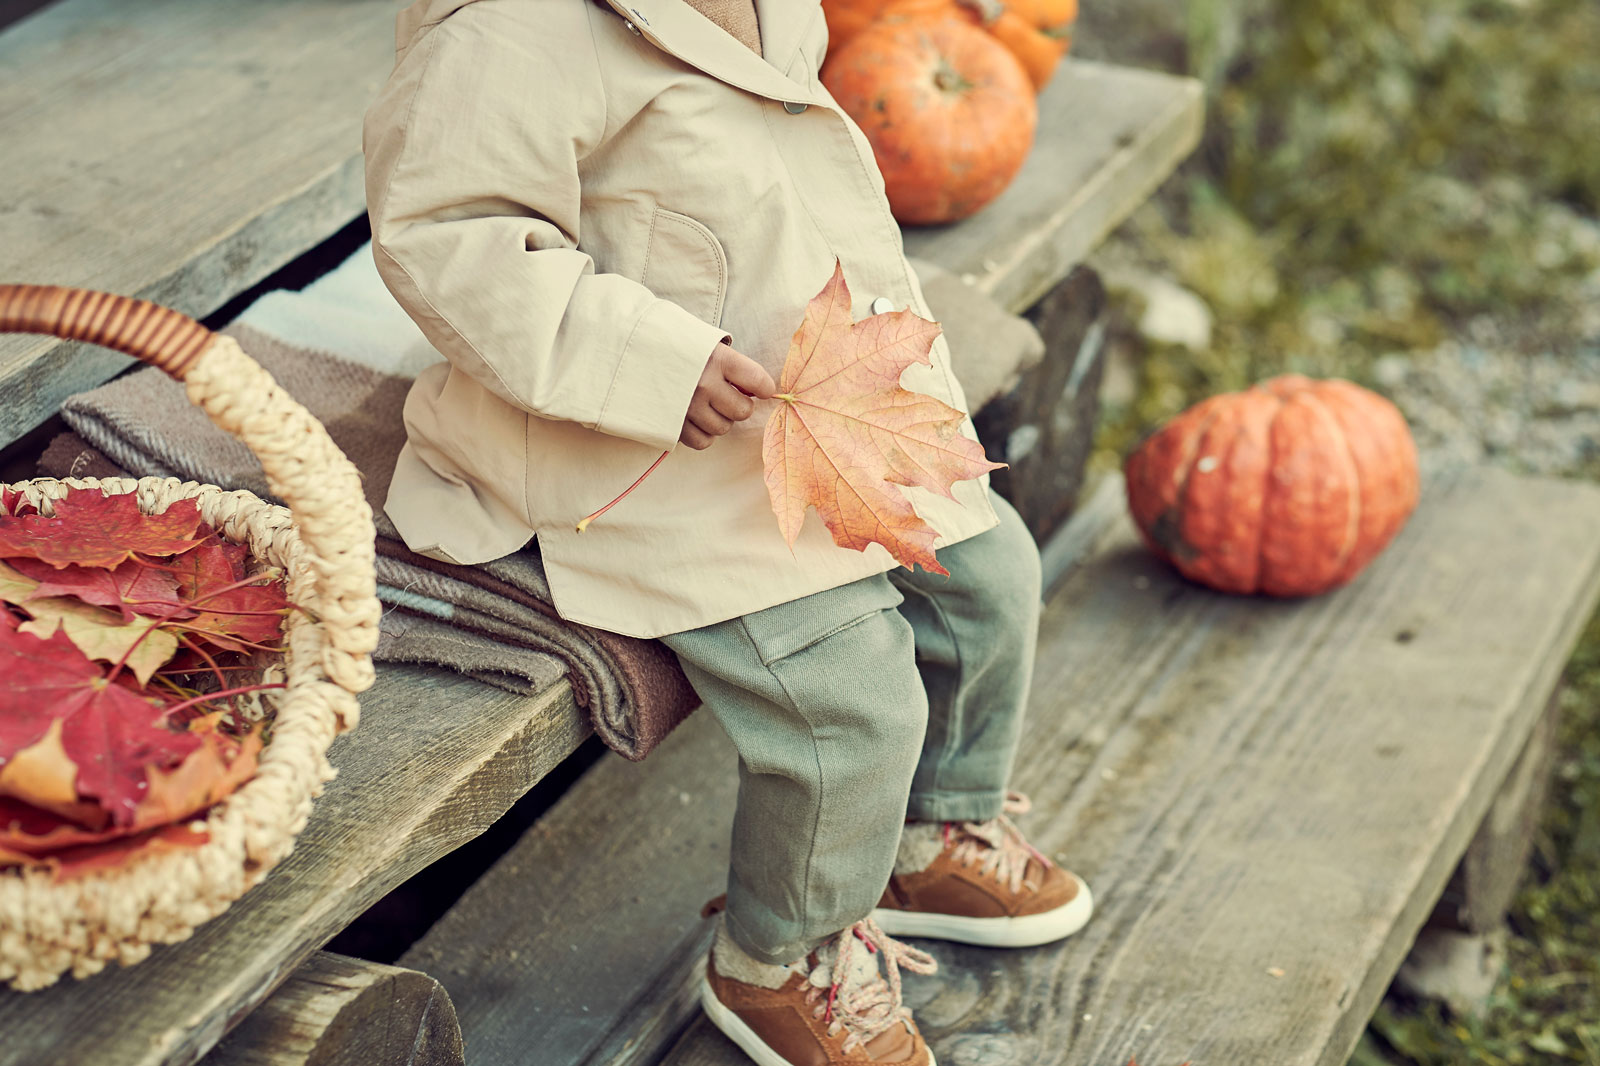 Photo of a young child holding a leaf and sitting next to pumpkins